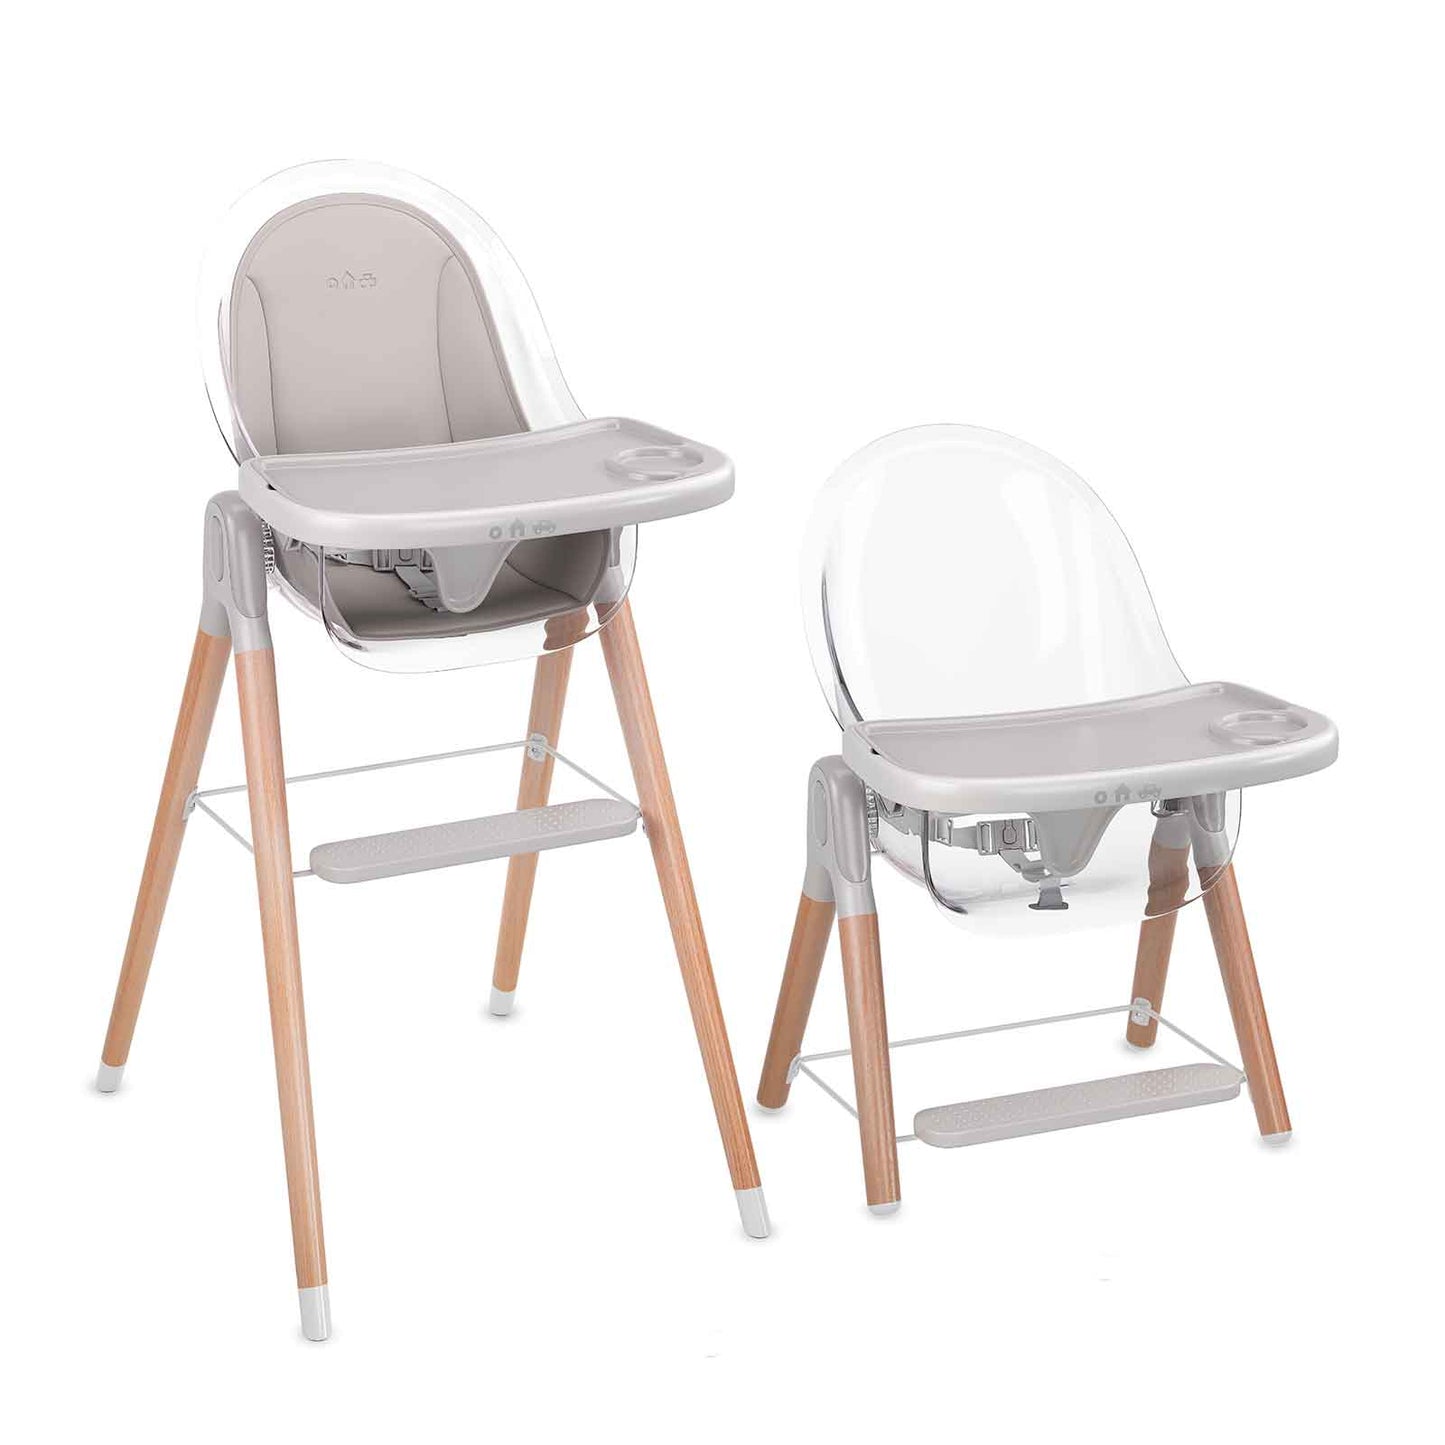 Children of Design 6 in 1 Classic High Chair with Cushion